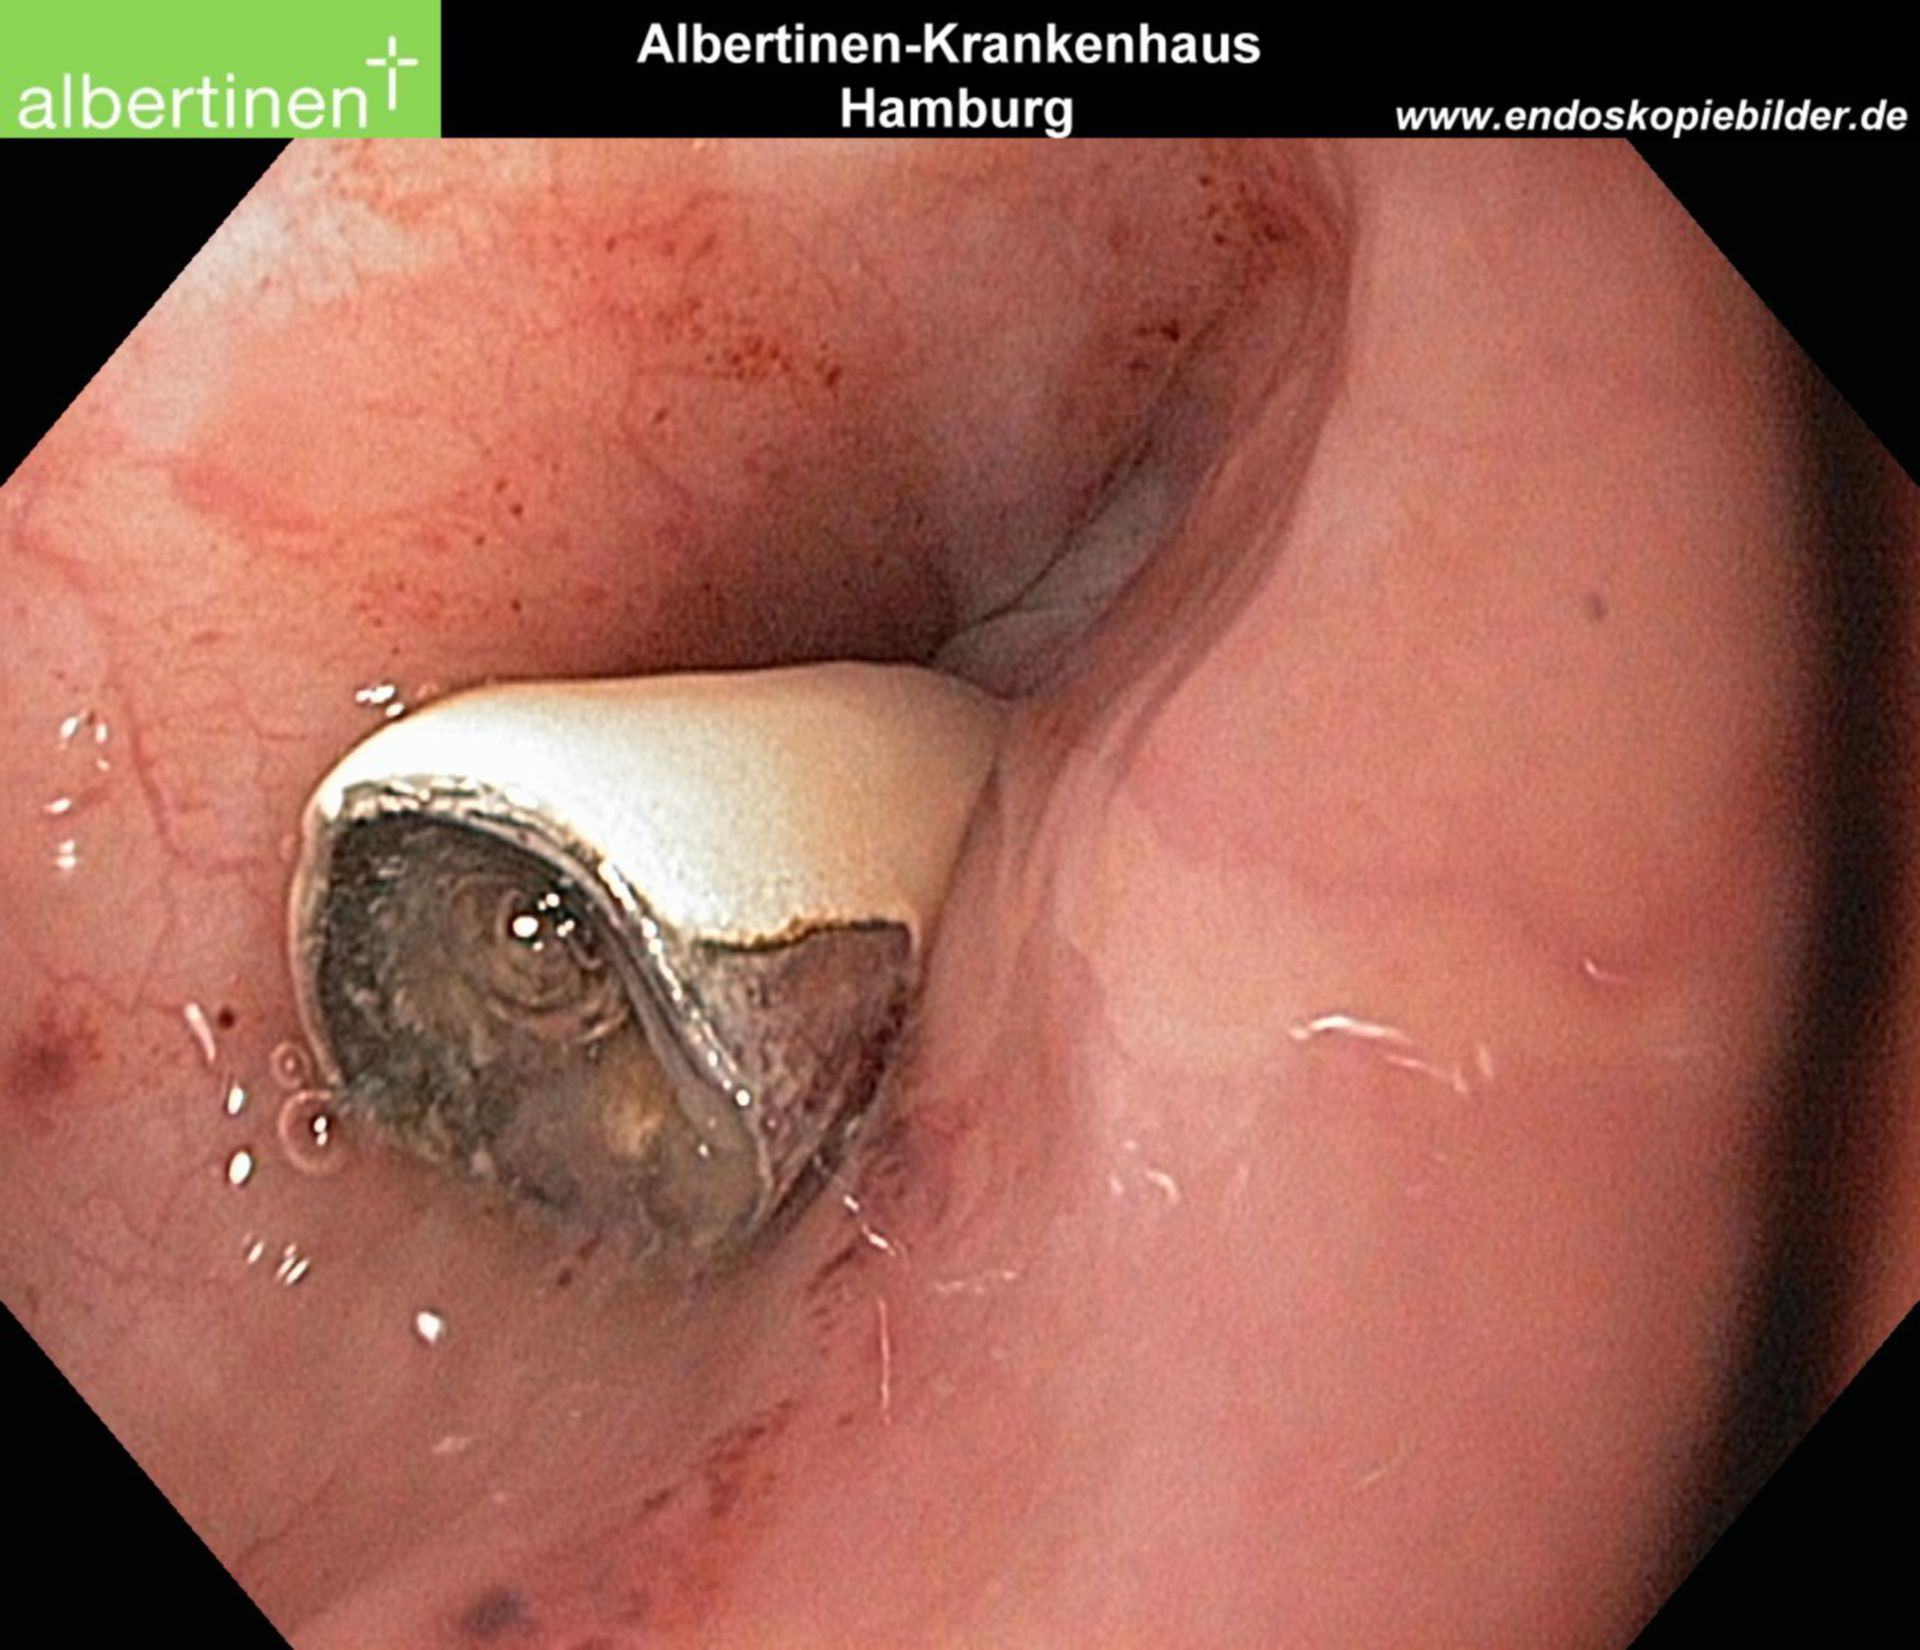 Tooth in esophagus after intubation